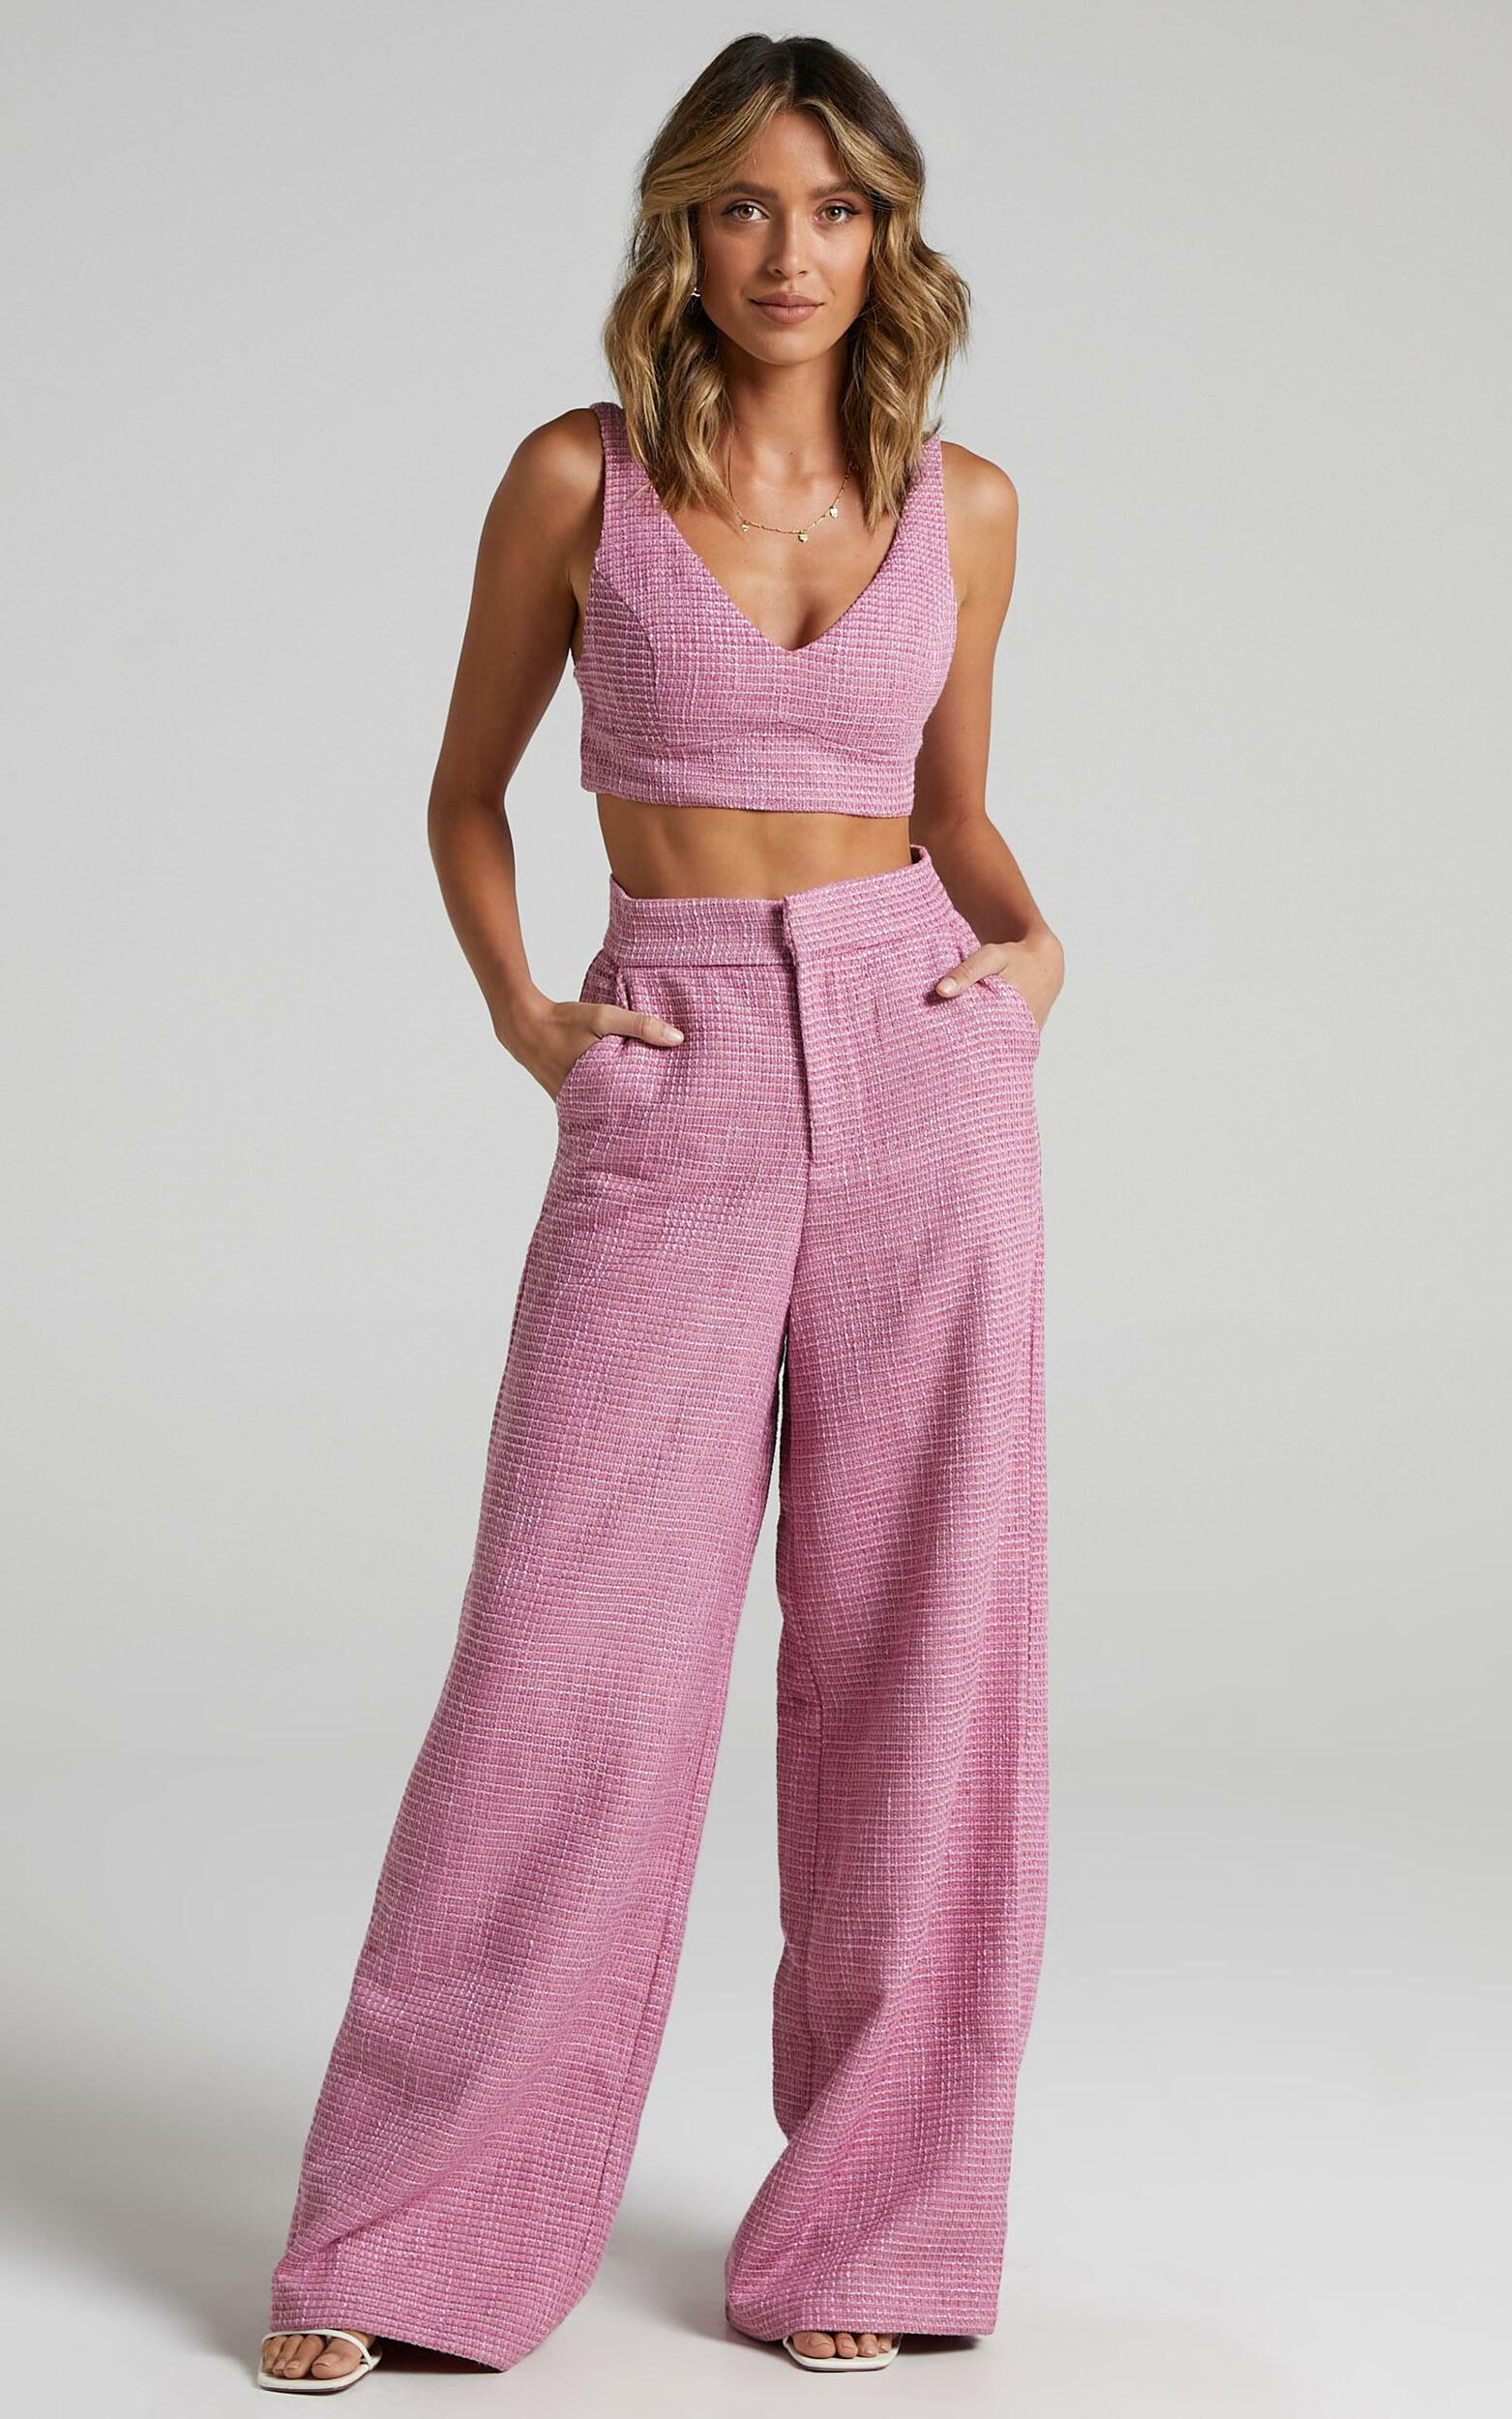 Adelaide Two Piece Set - Crop Top and Wide Leg Pants Set in Pink - 06, PNK2